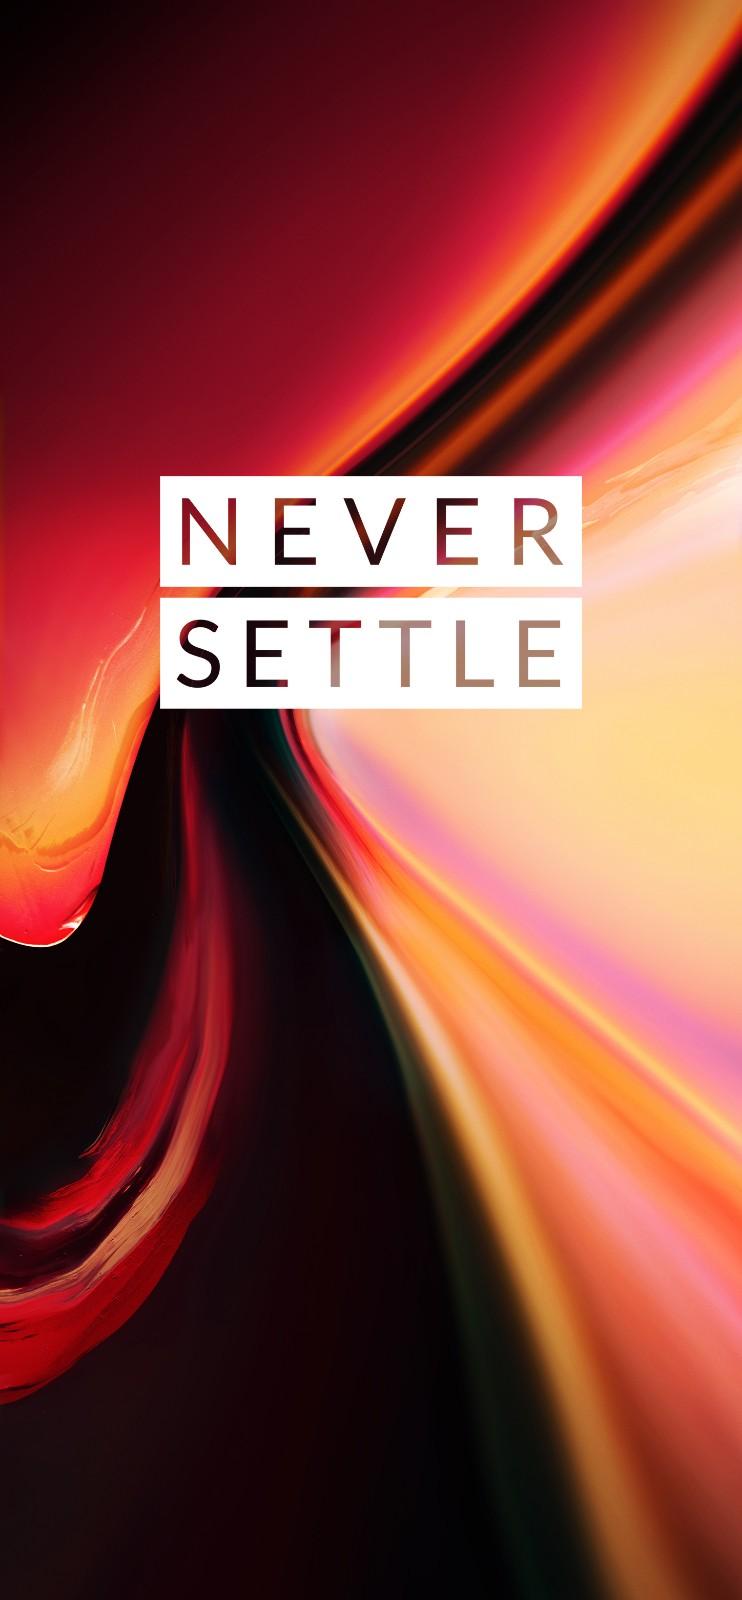 OnePlus 7 (Pro)'s Official Wallpaper Now Up For Grabs